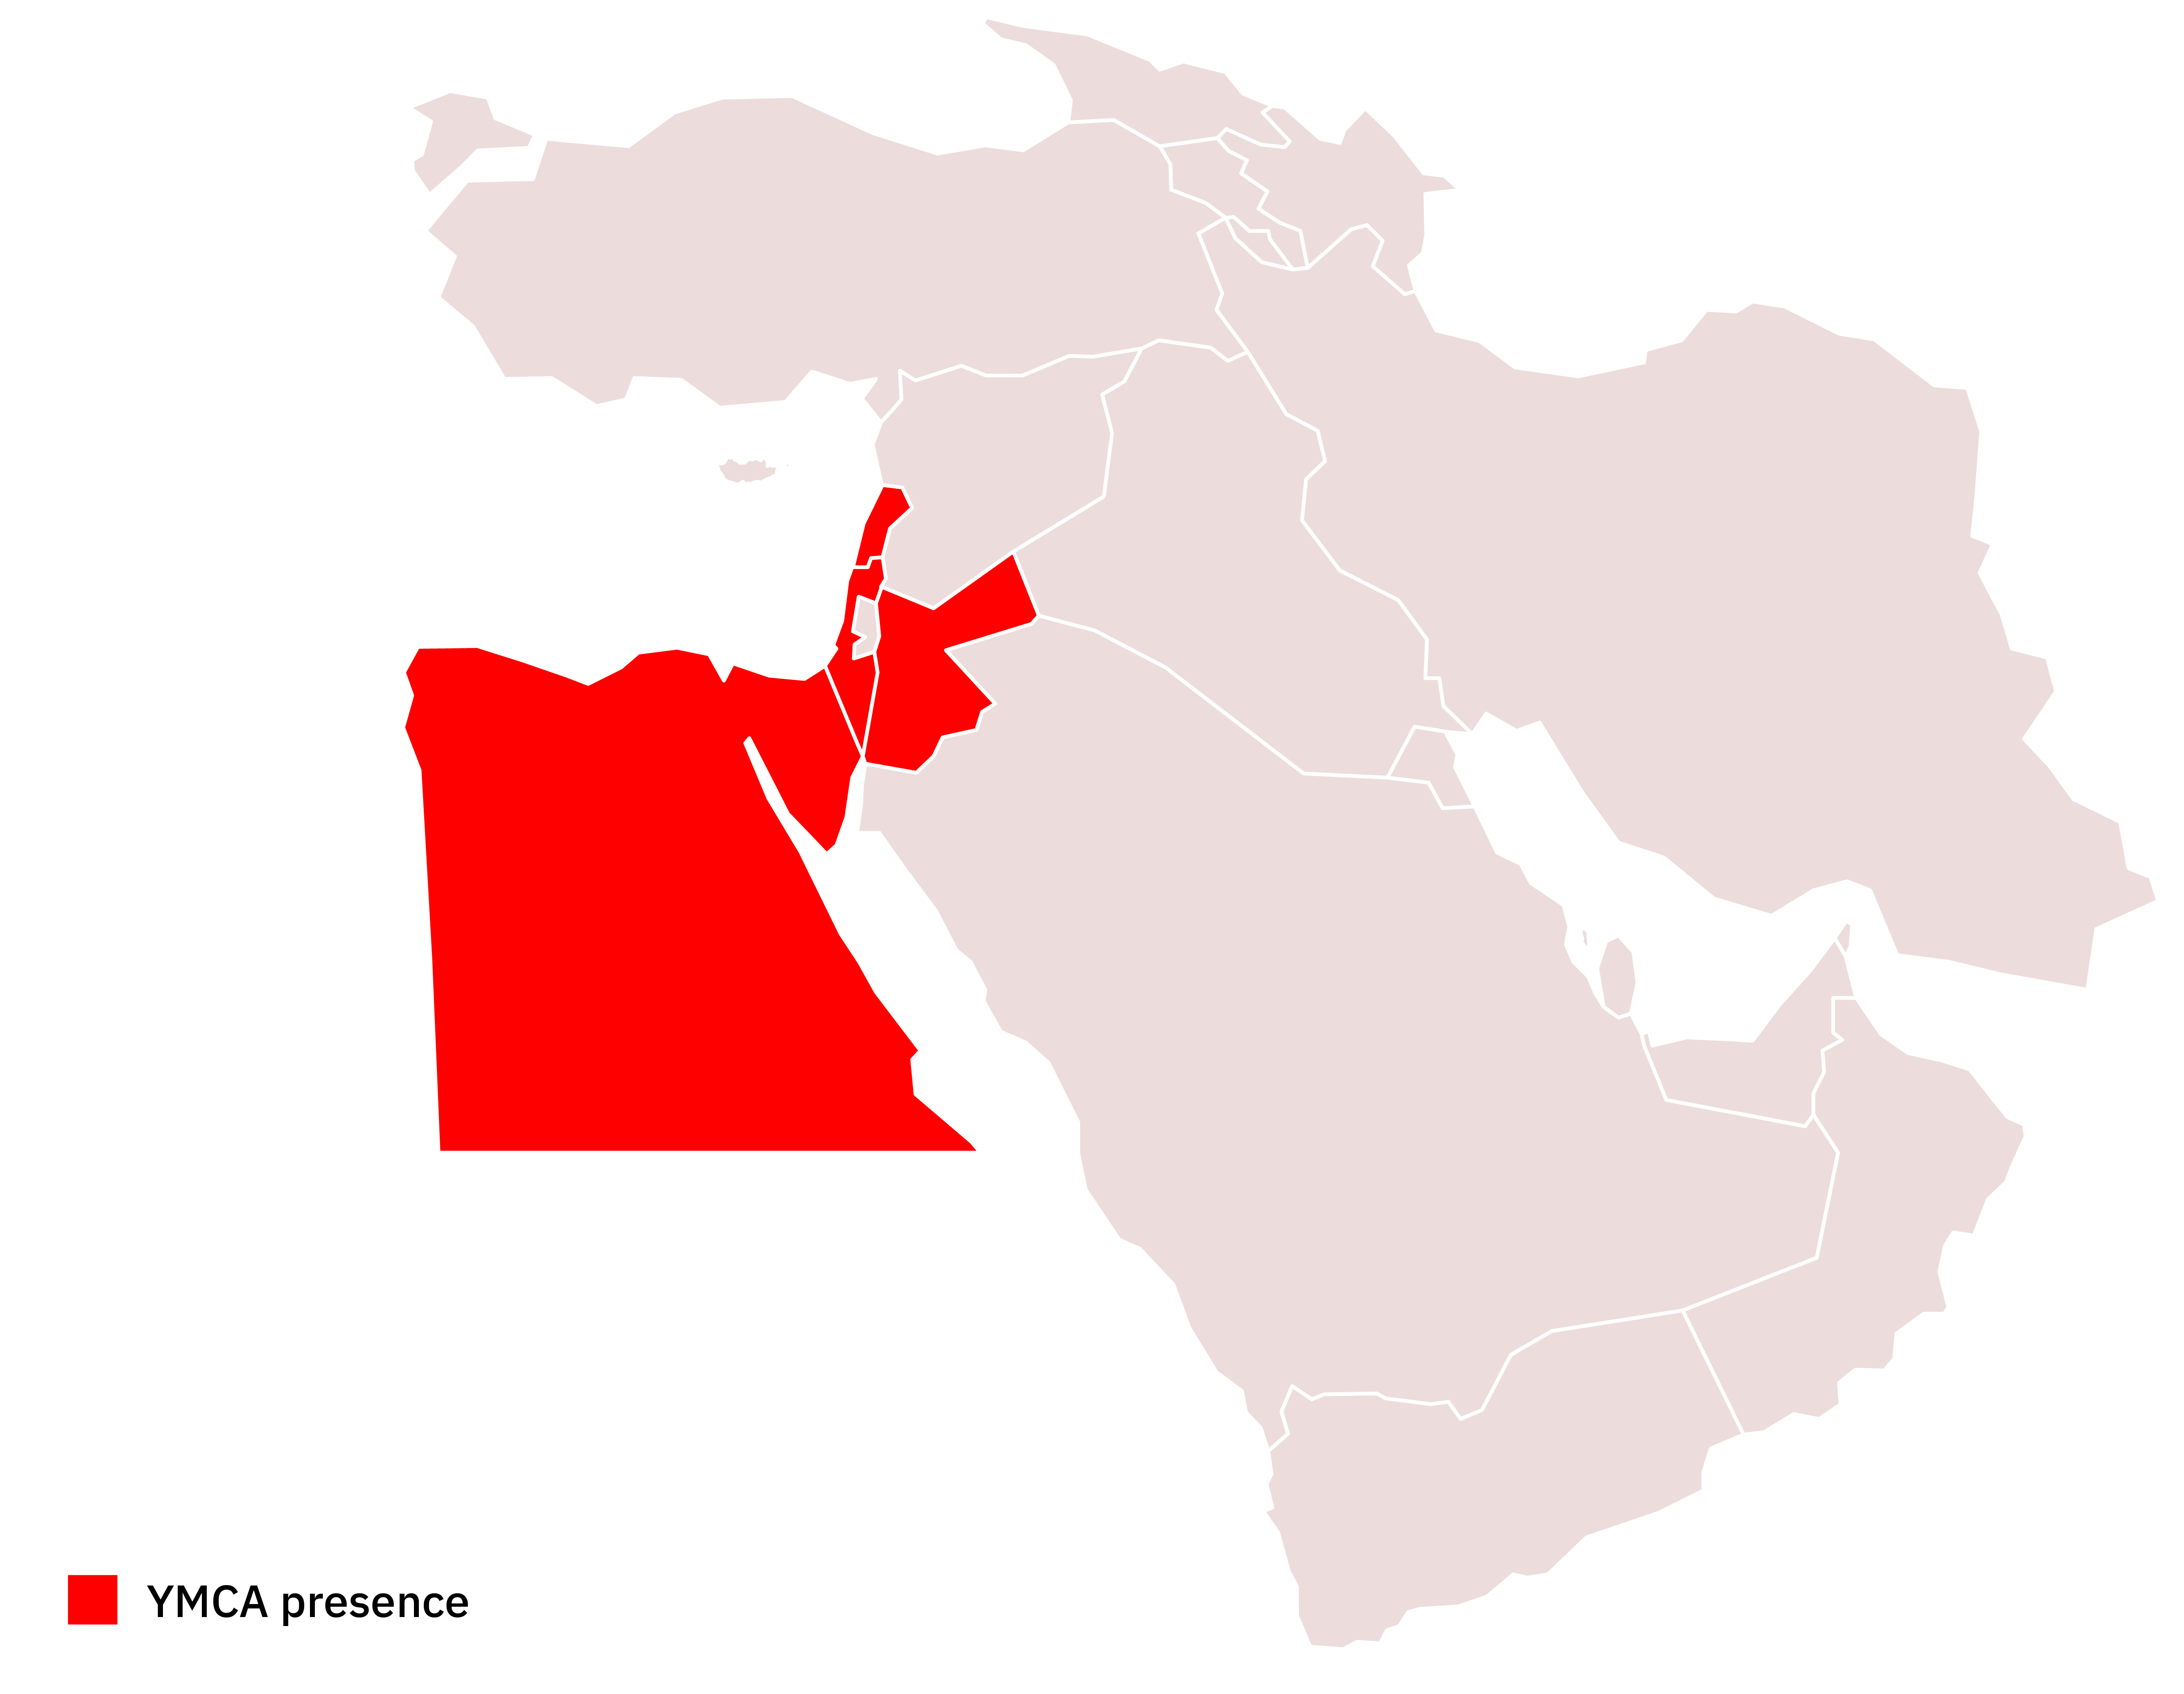 YMCA presence in the middle east